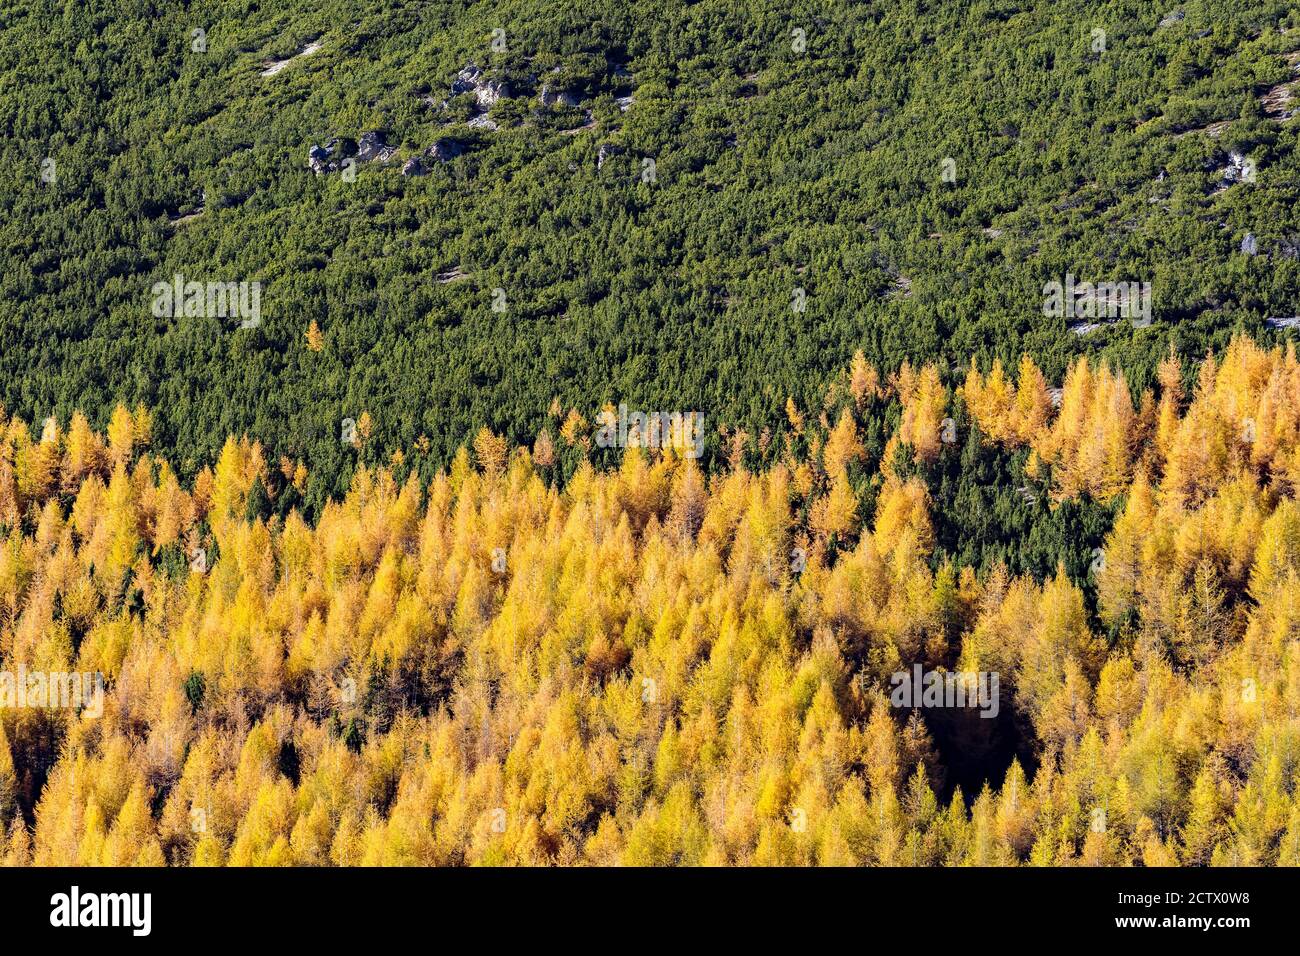 forest with firs and larches in autumnal dress Stock Photo